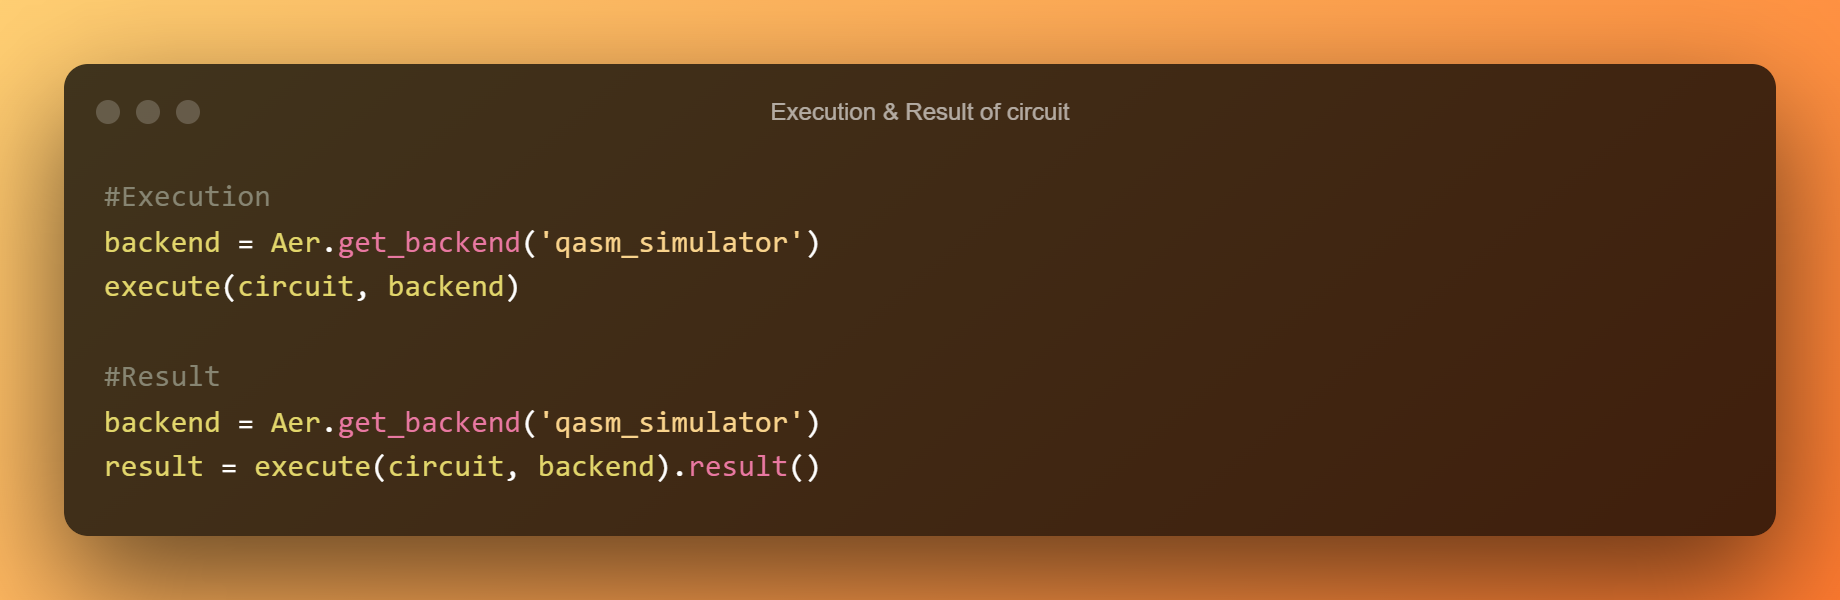 Execution Result Of Circuit